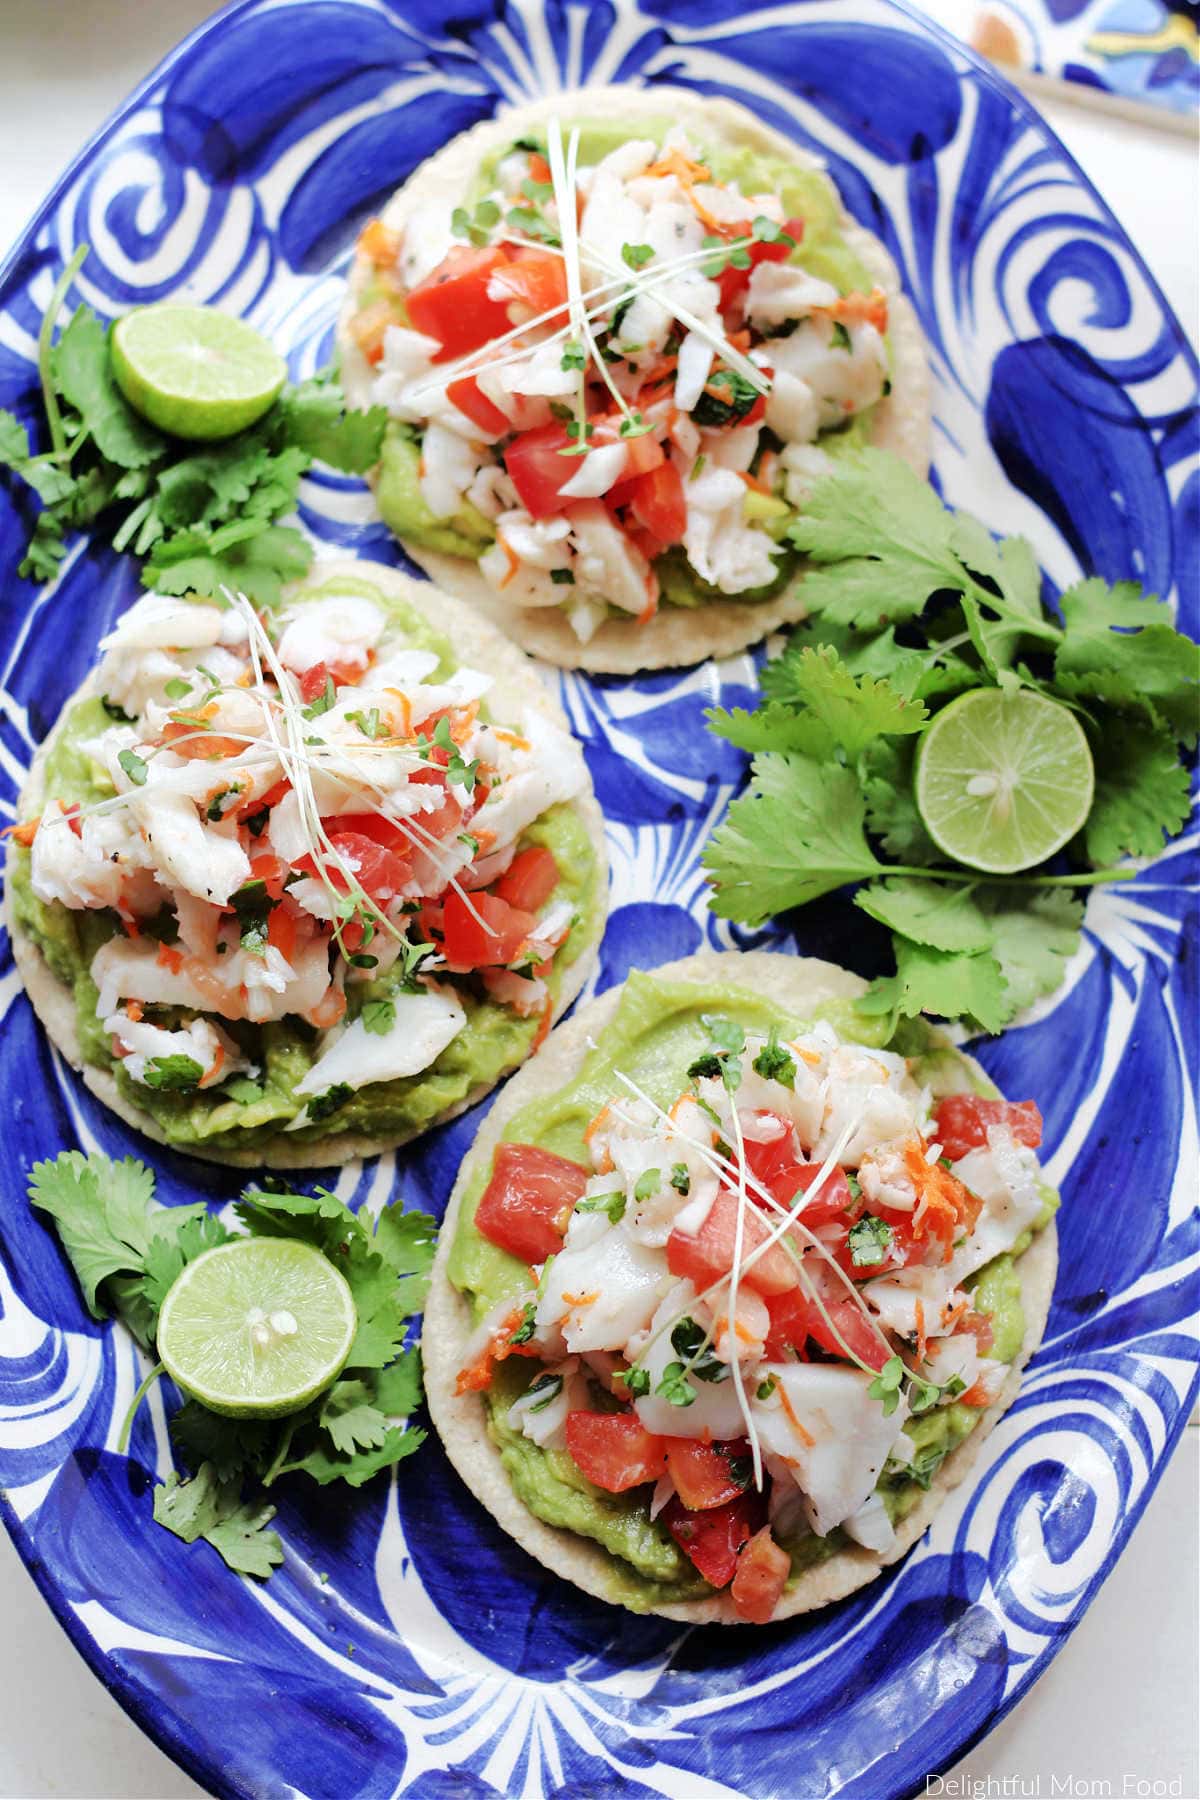 best ceviche recipe made with halibut, tomato and onion with guacamole on corn tortillas and served on a plate